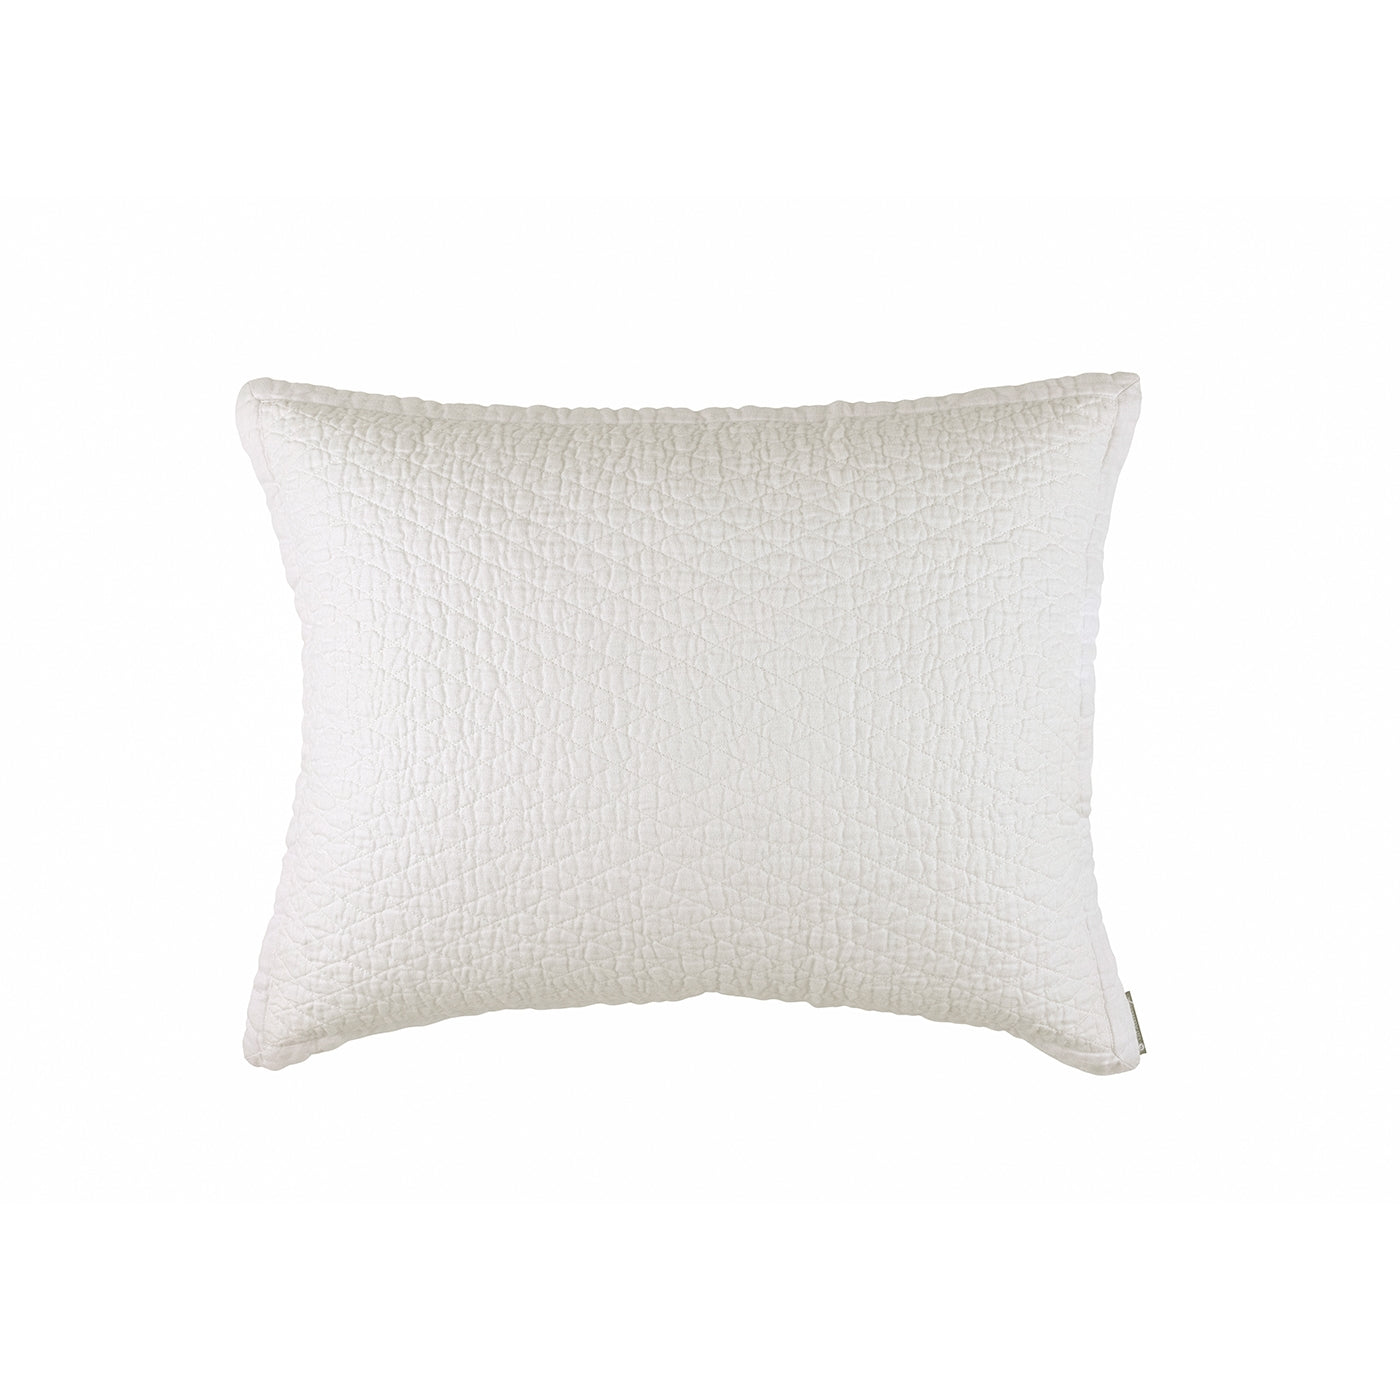 Dawn White Standard Pillow by Lili Alessandra | Fig Linens and Home